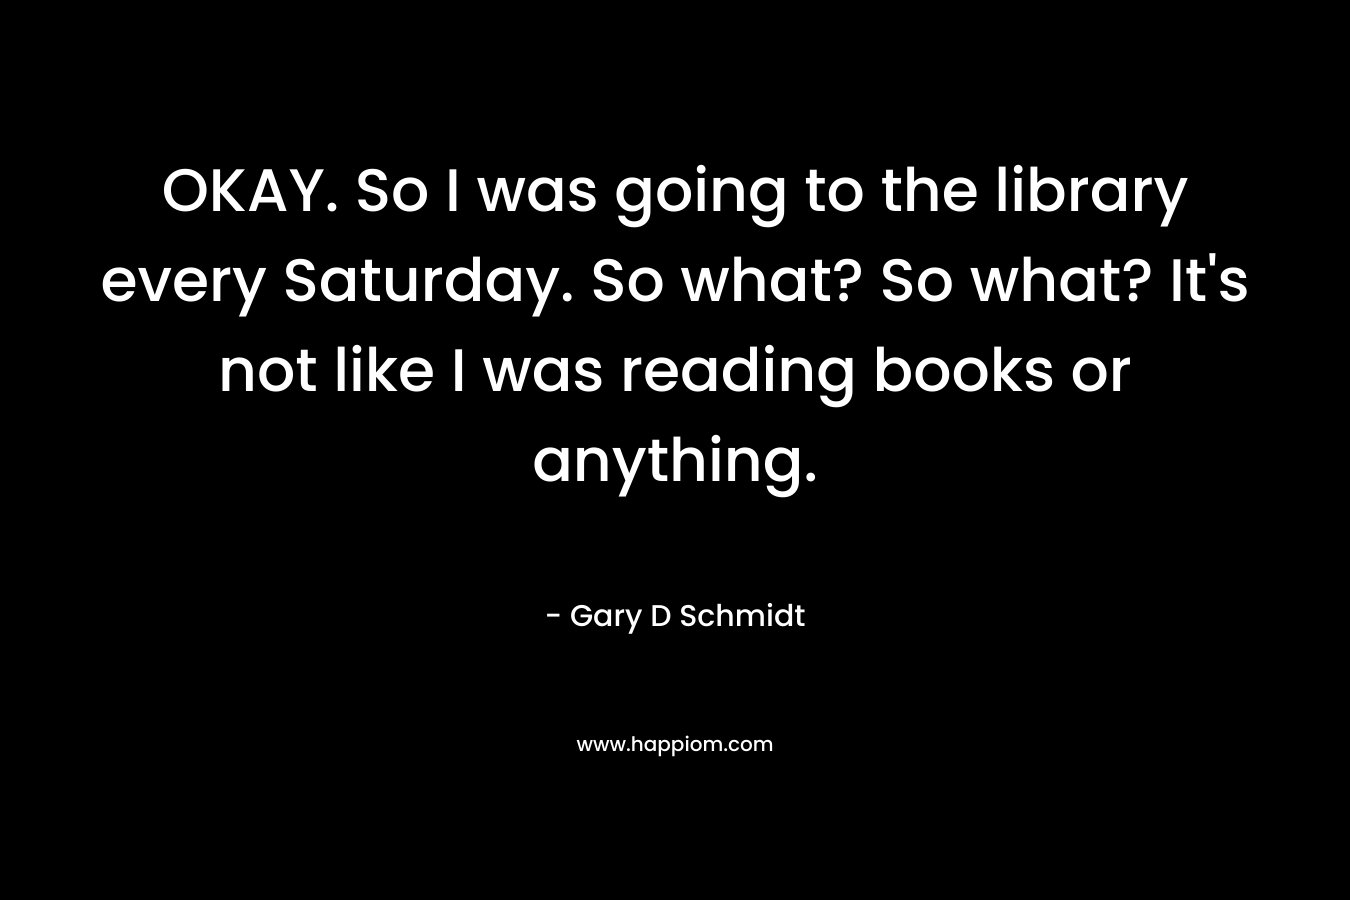 OKAY. So I was going to the library every Saturday. So what? So what? It’s not like I was reading books or anything. – Gary D Schmidt